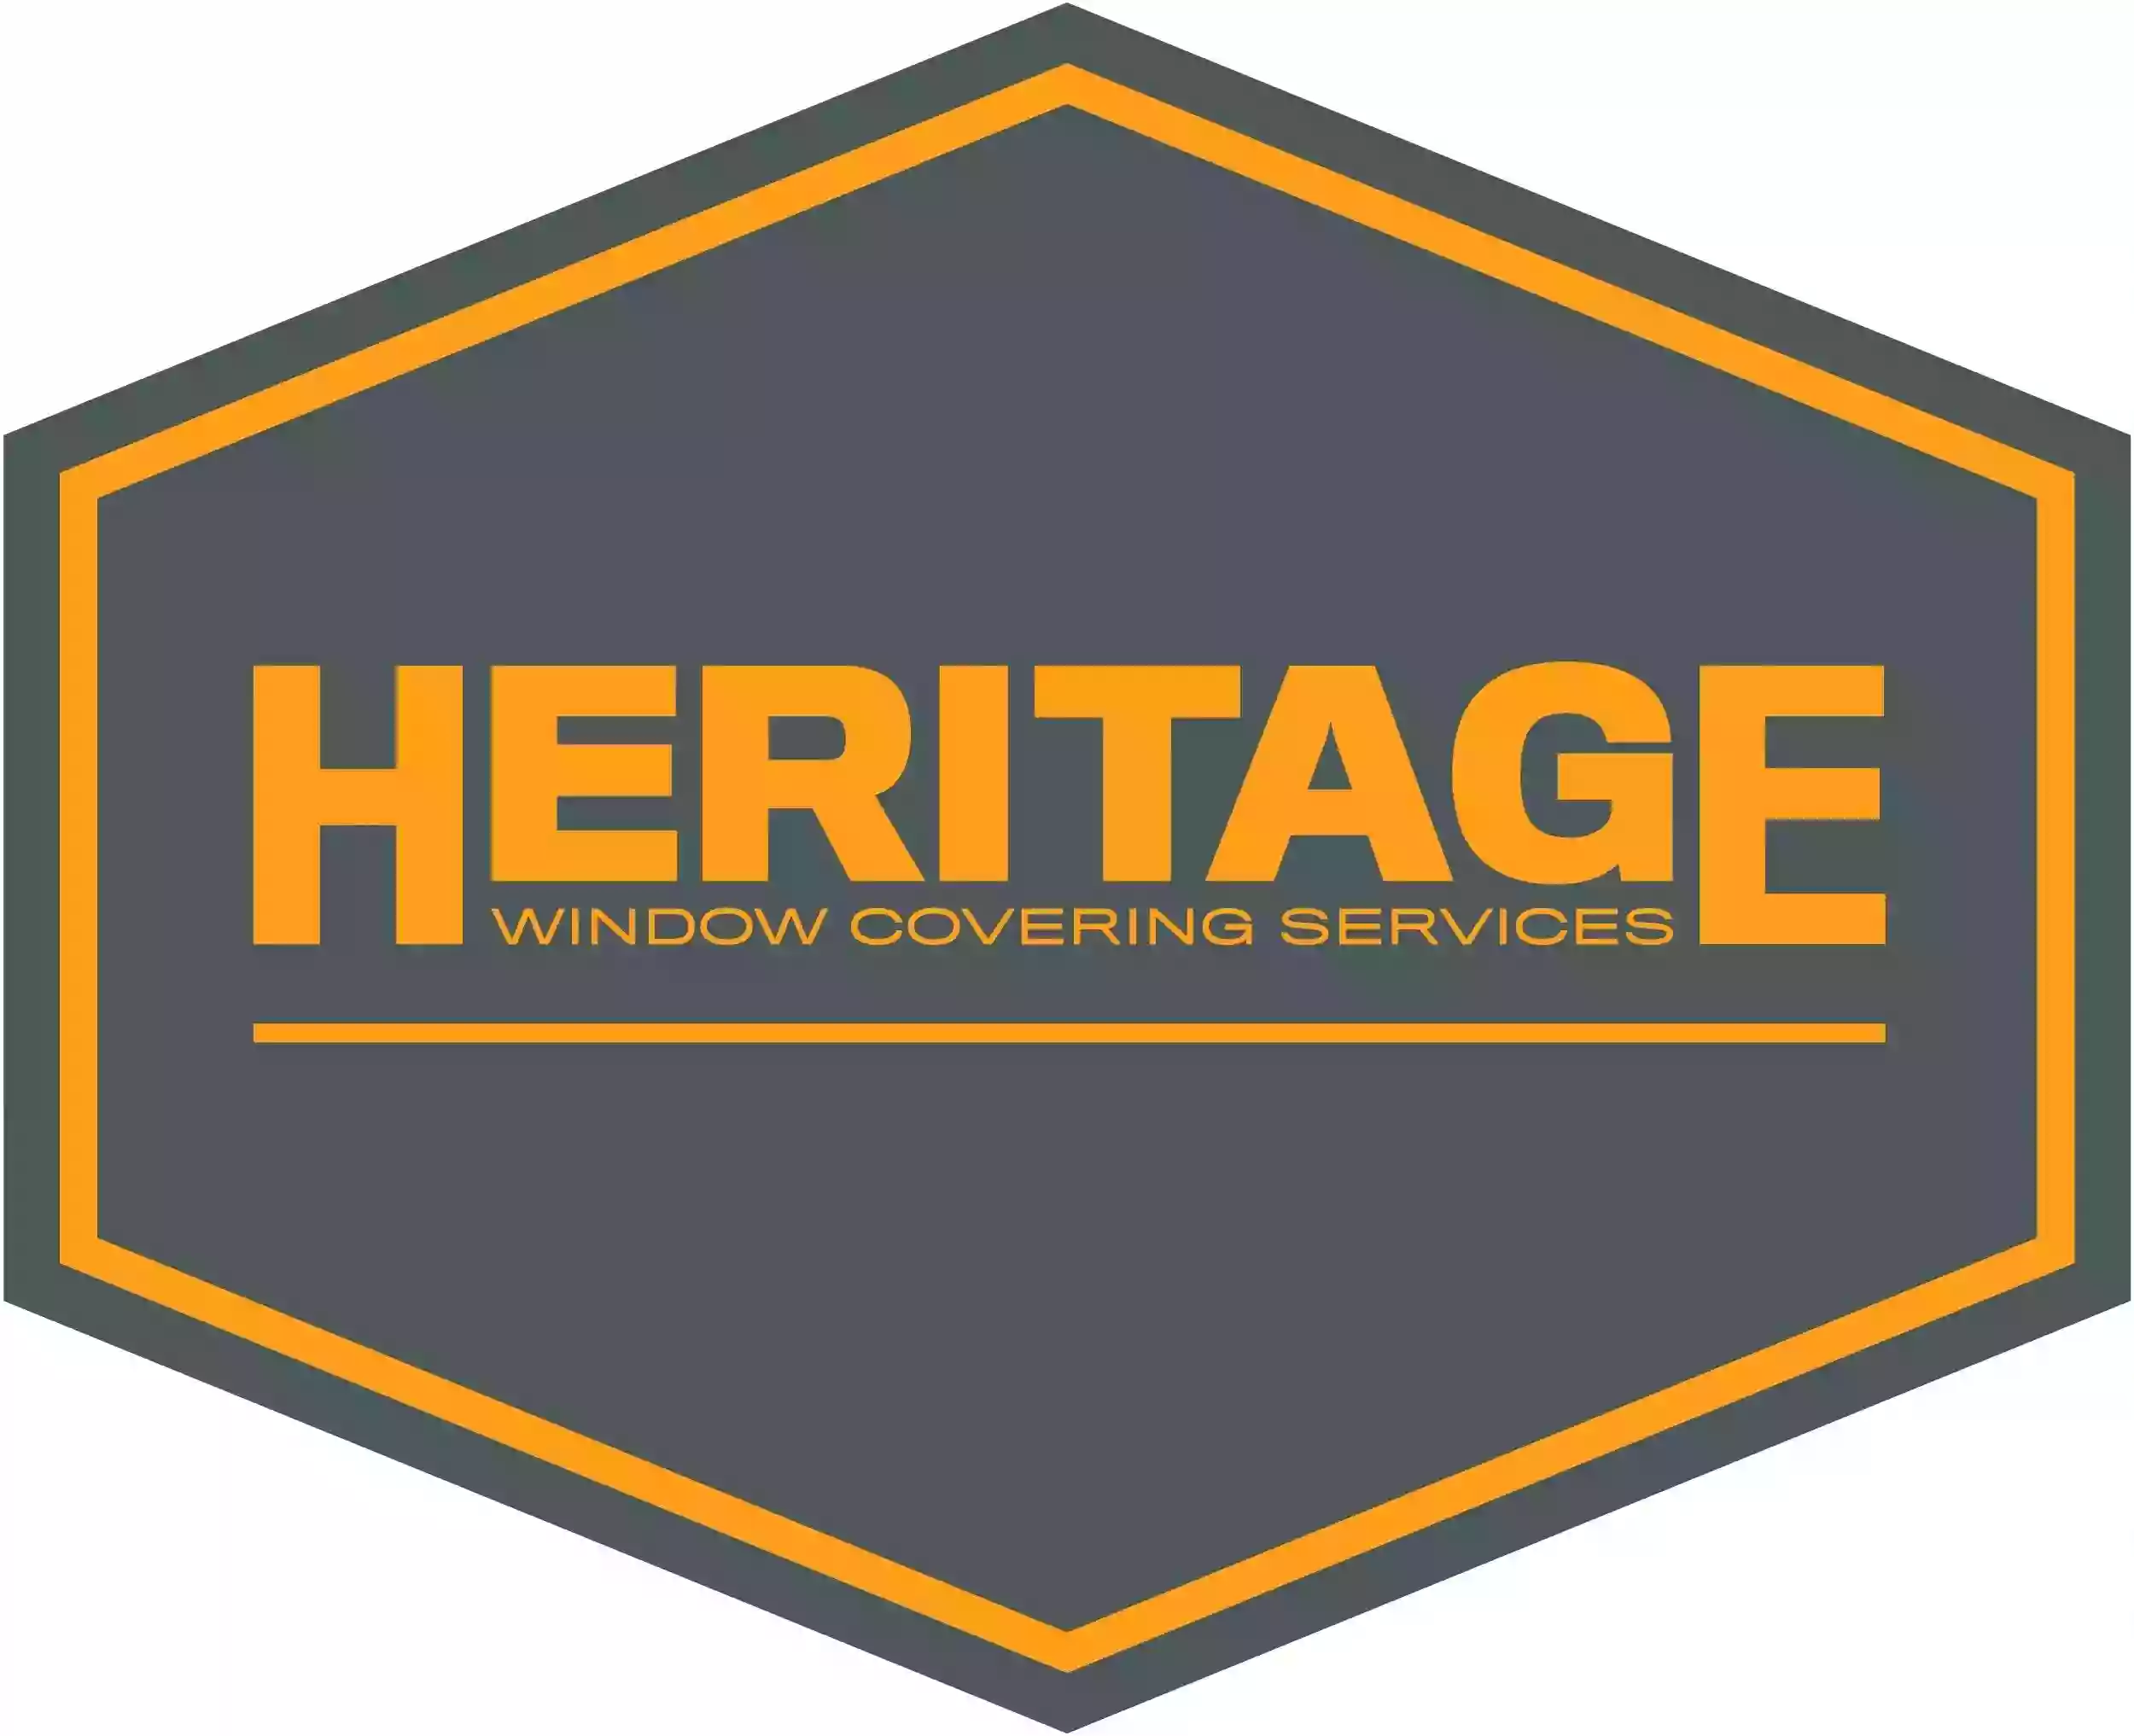 Heritage Window Covering Services